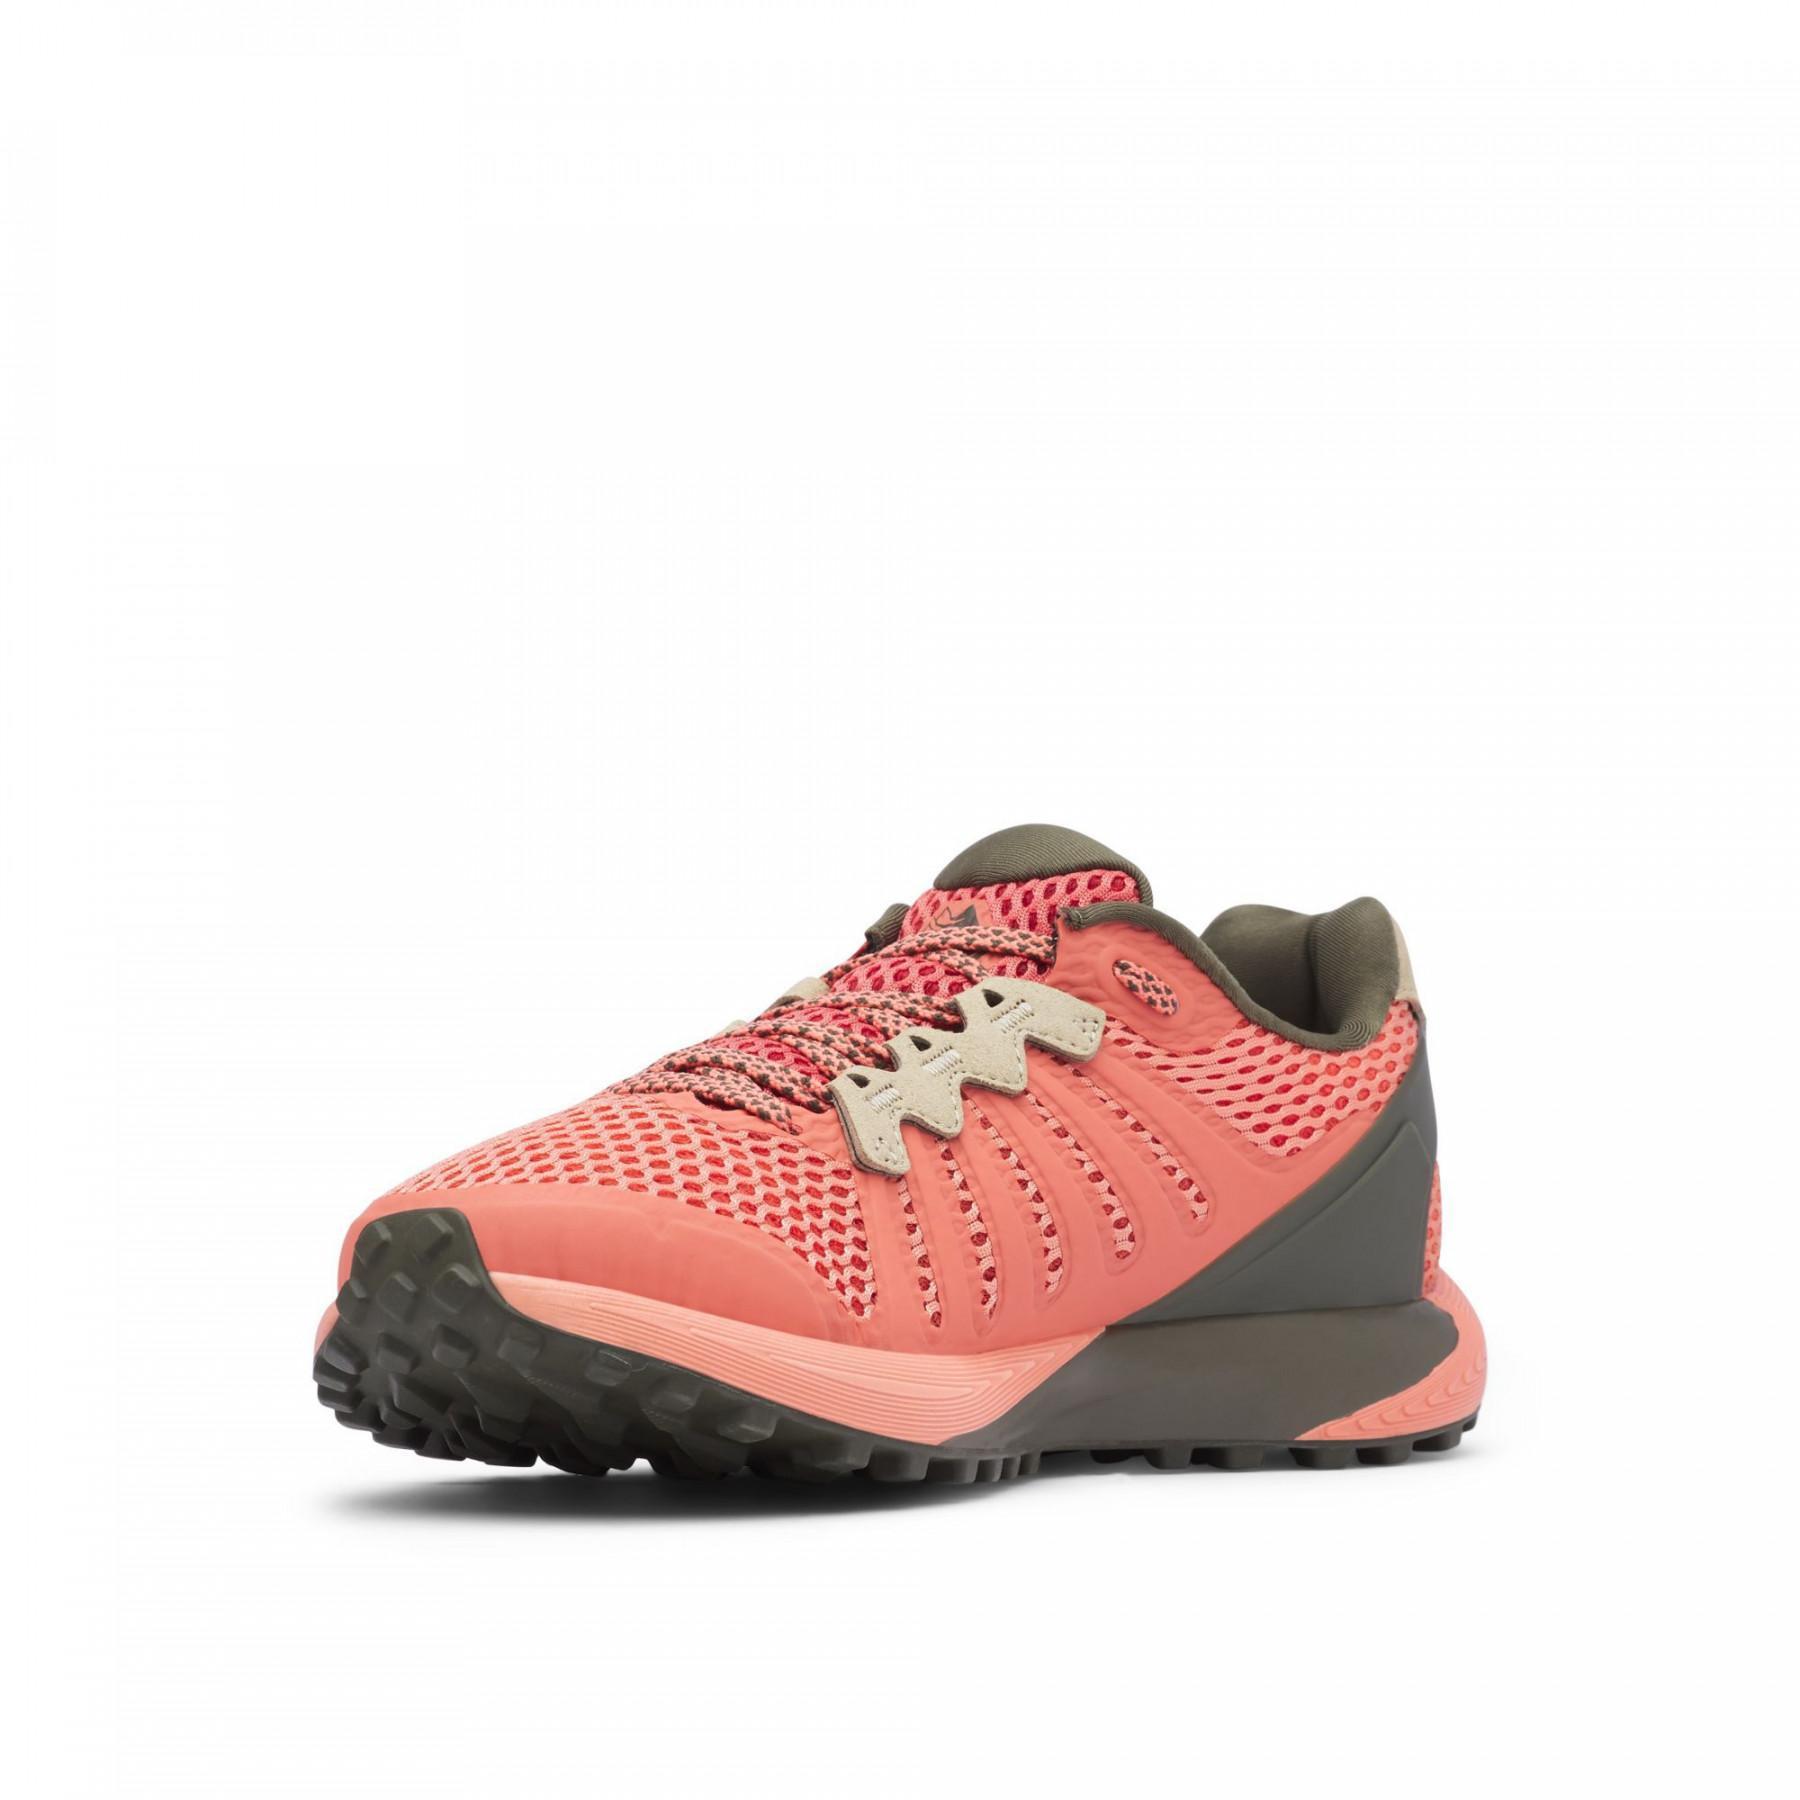 Zapatos de mujer Columbia Montrail F.K.T.